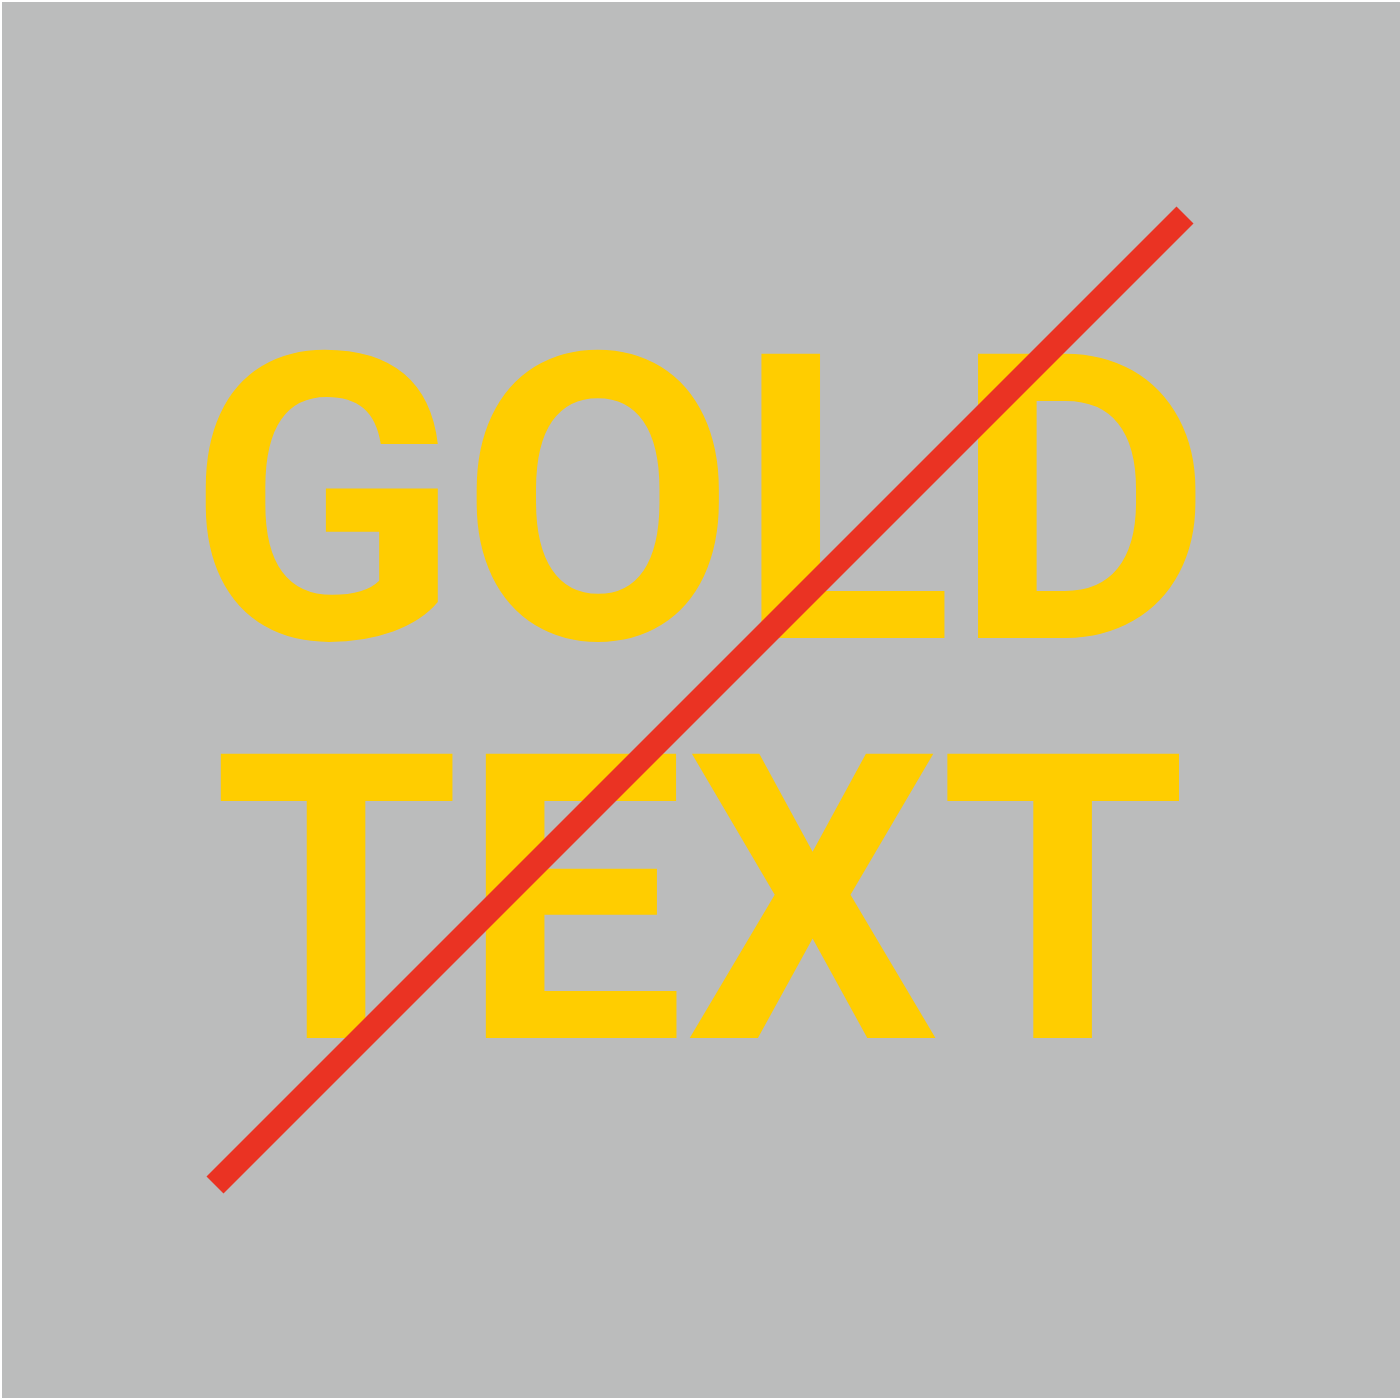 Gold text over a light gray background demonstrating insufficient contrast